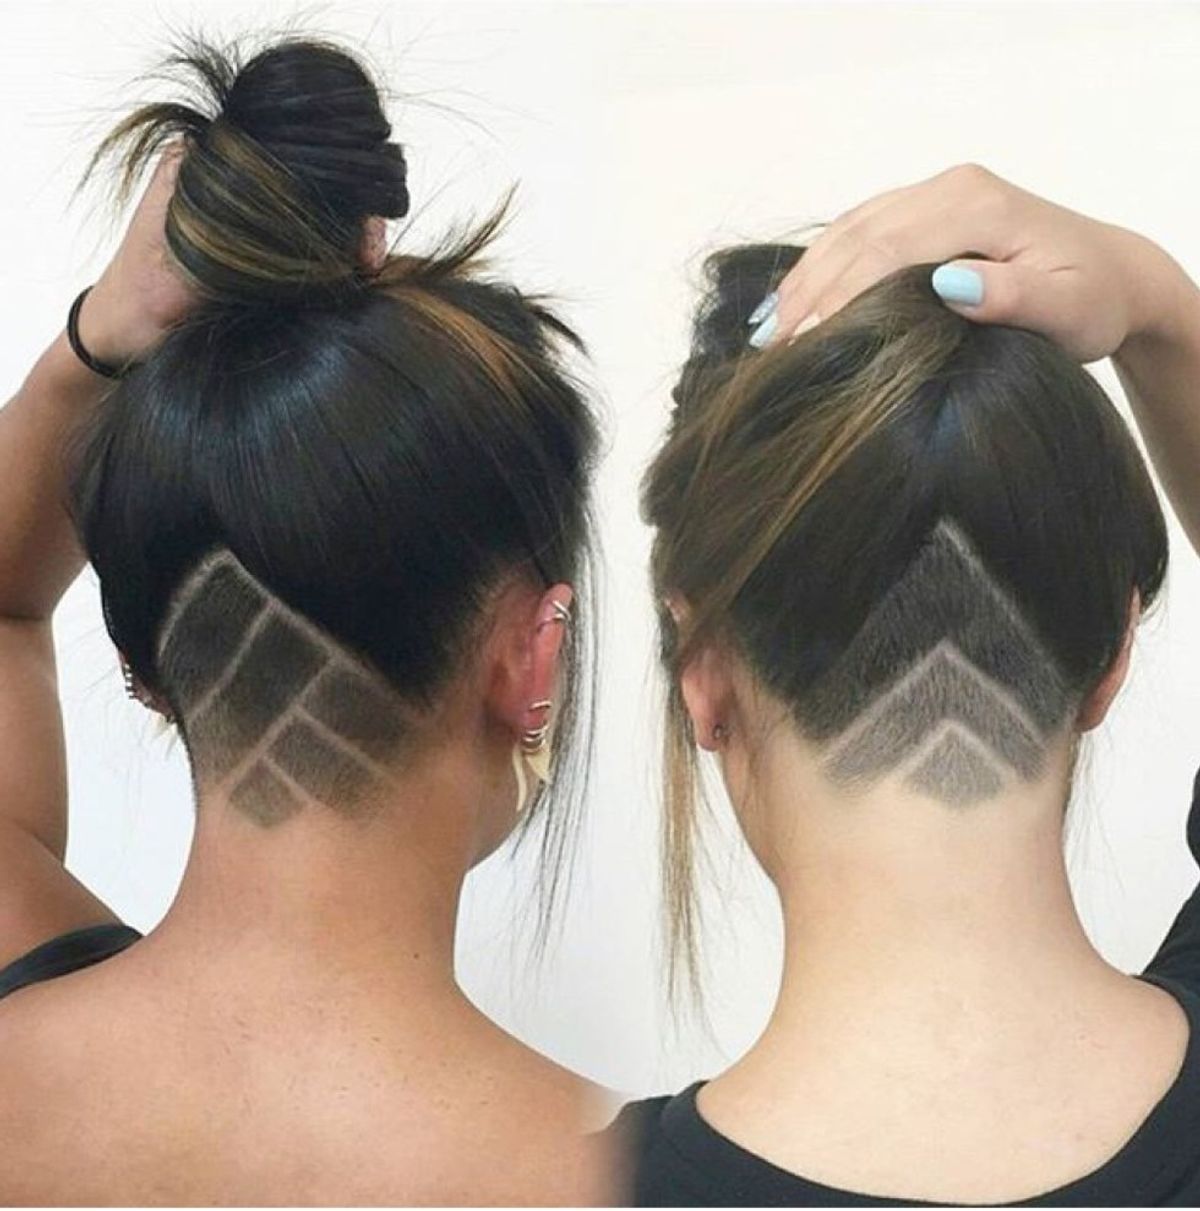 My Mom And I Got Undercuts Together